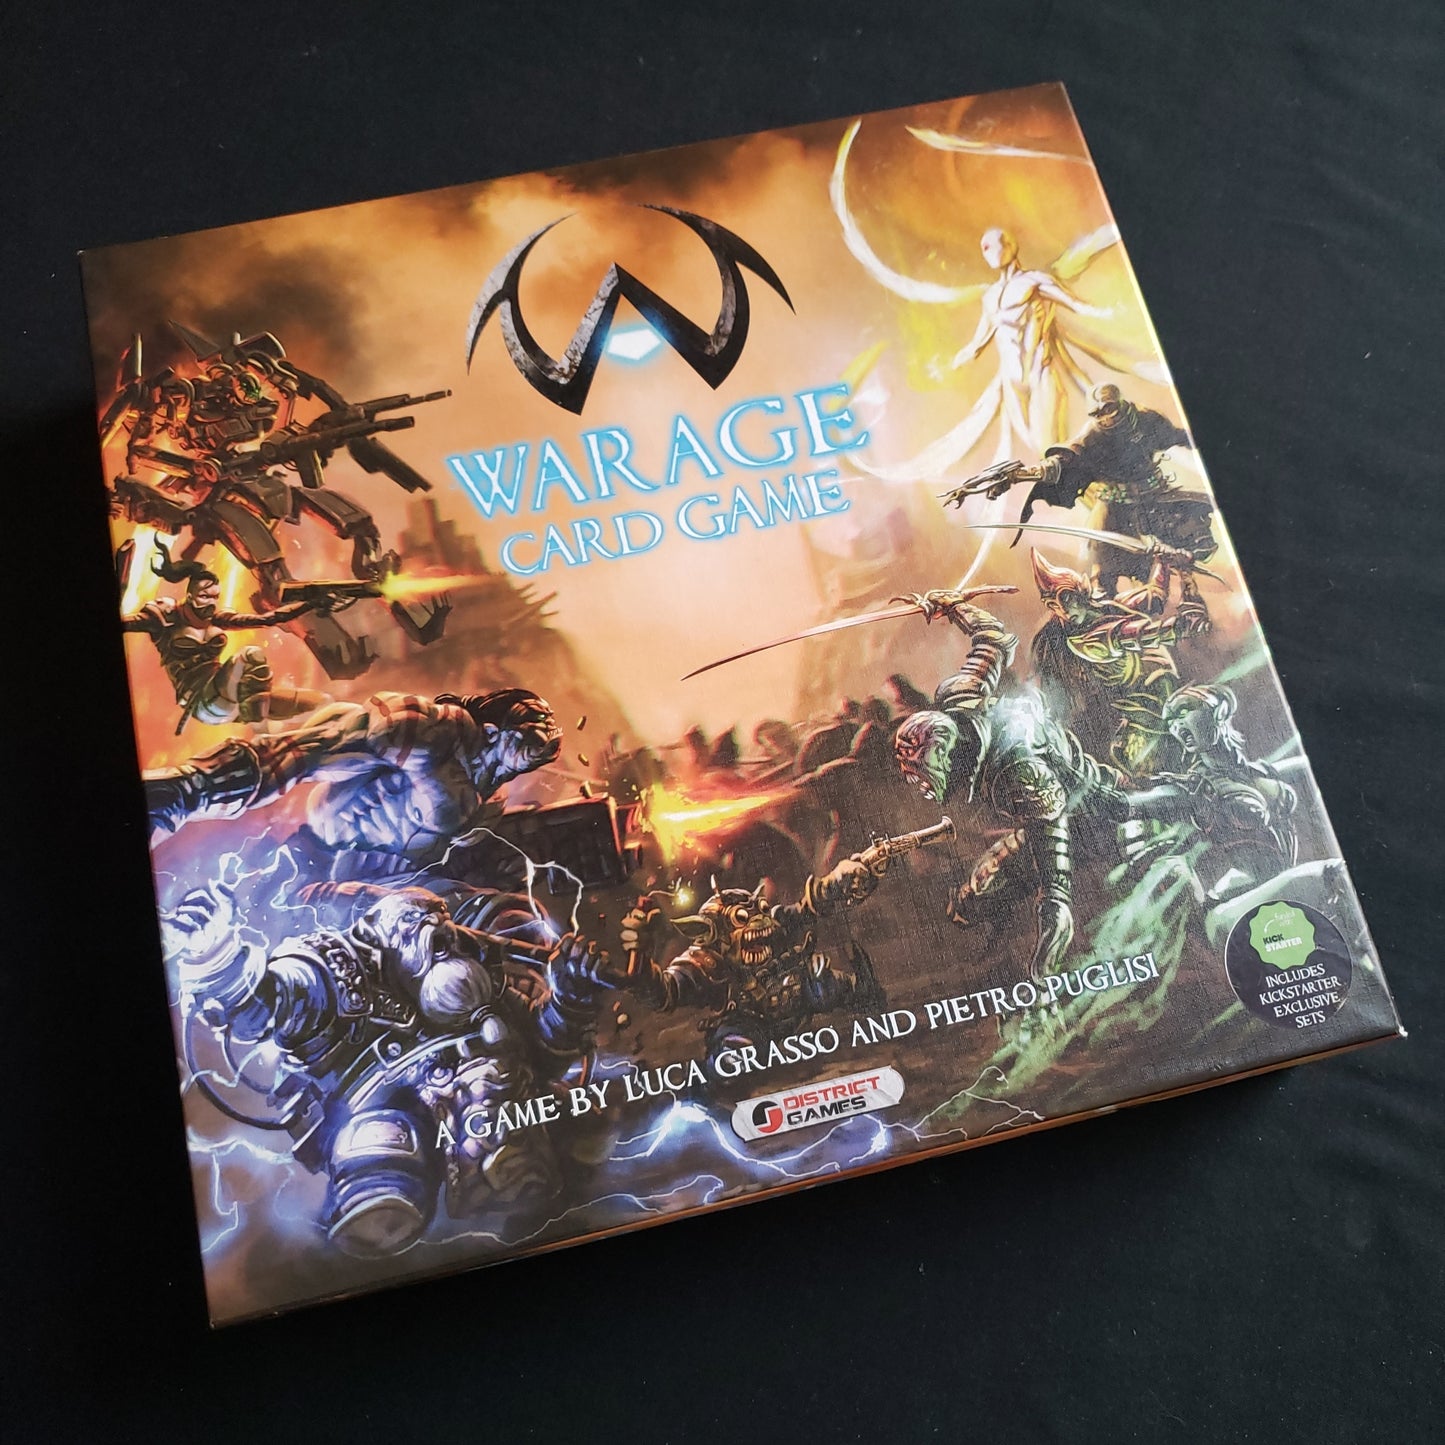 Image shows the front cover of the box of the Kickstarter Edition of the WarAge card game